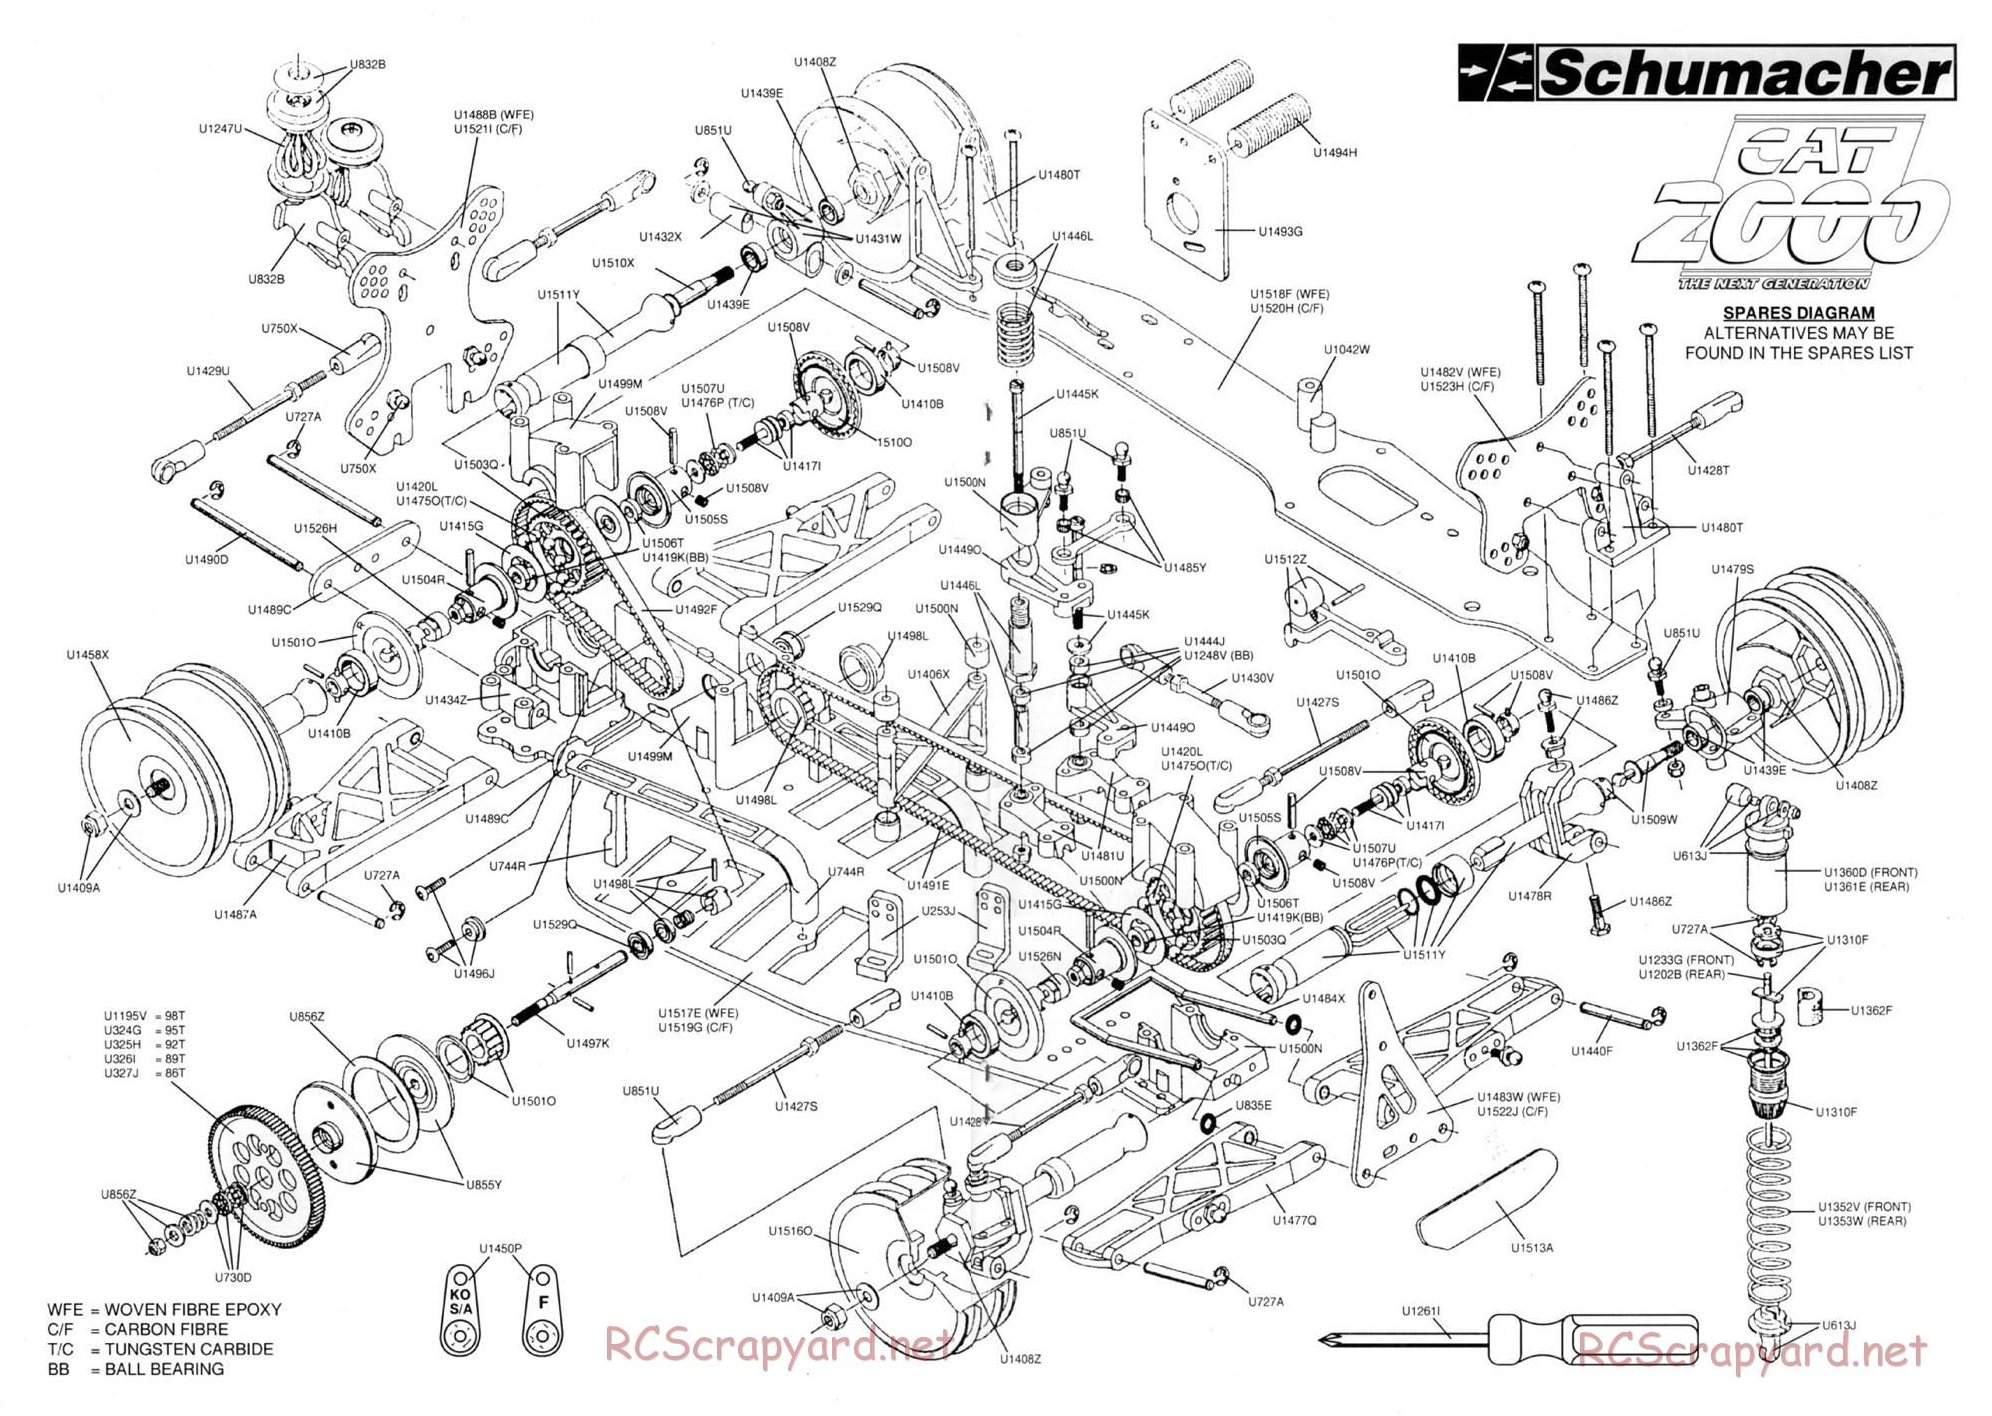 Schumacher - Cat 2000 - Exploded View - Page 1